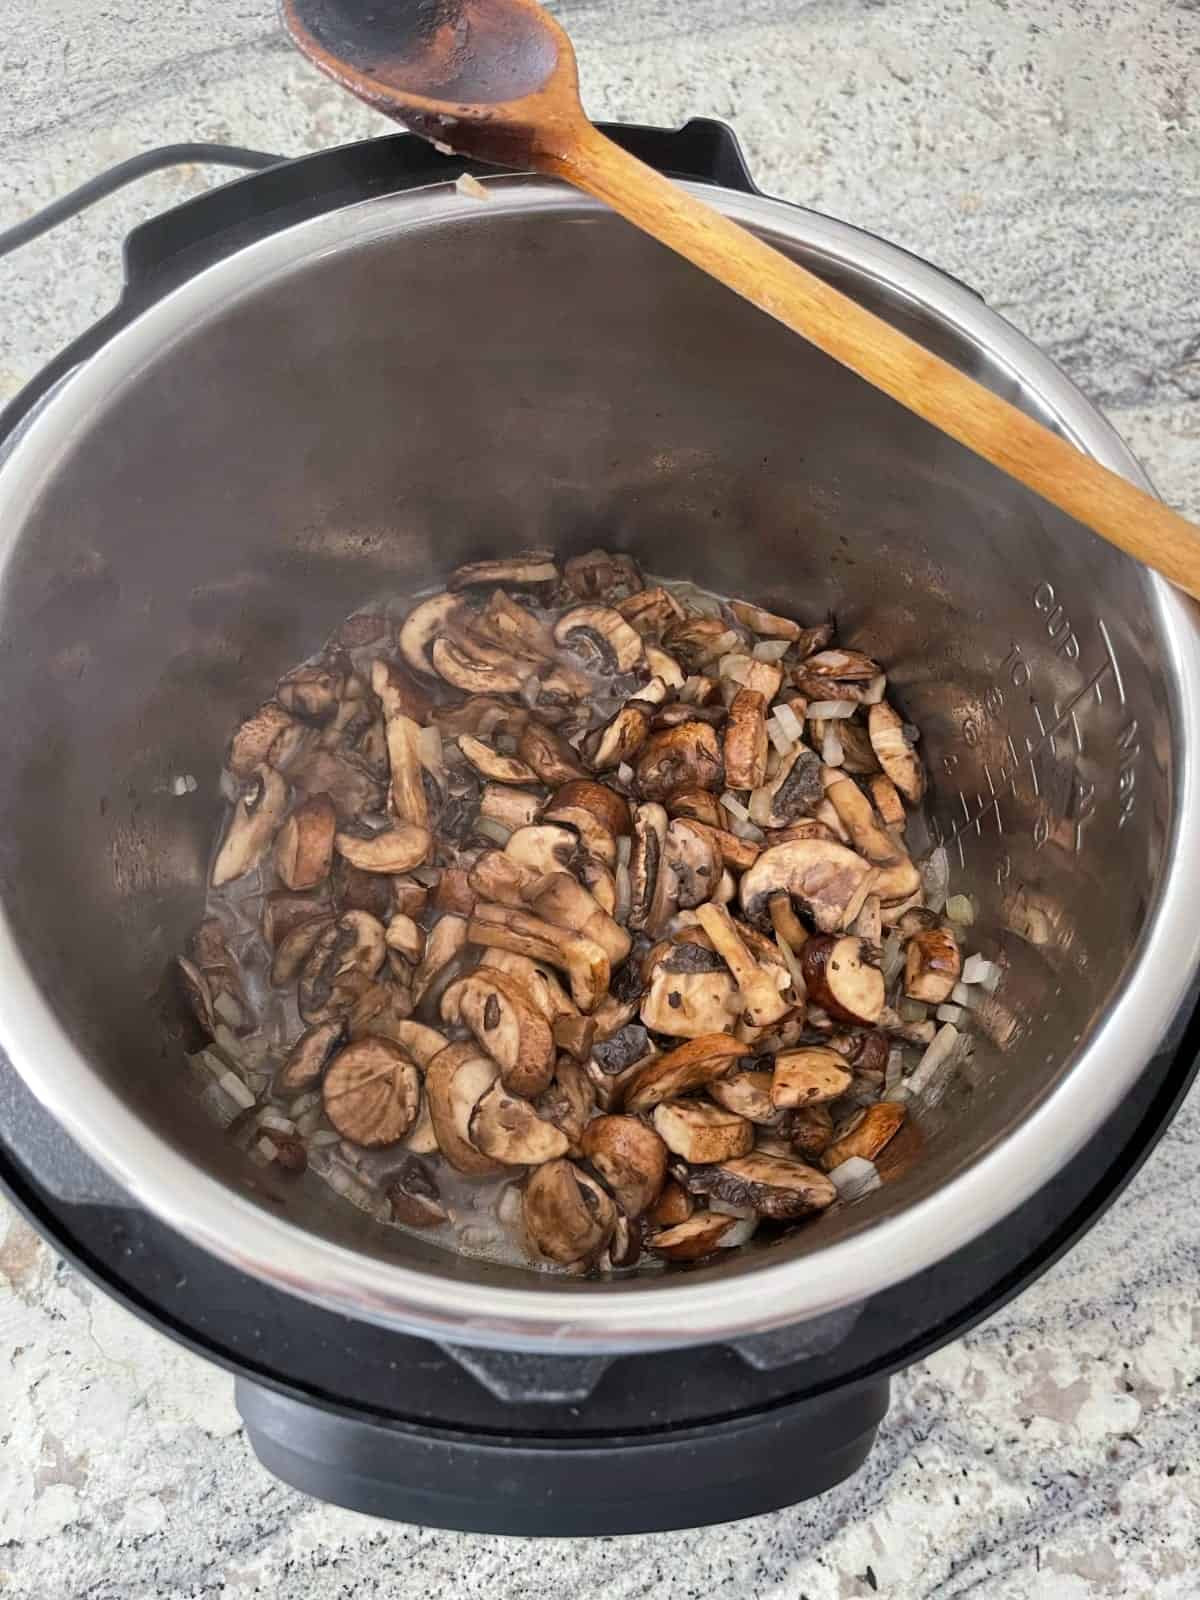 Sauteeing onions and mushrooms in InstantPot.